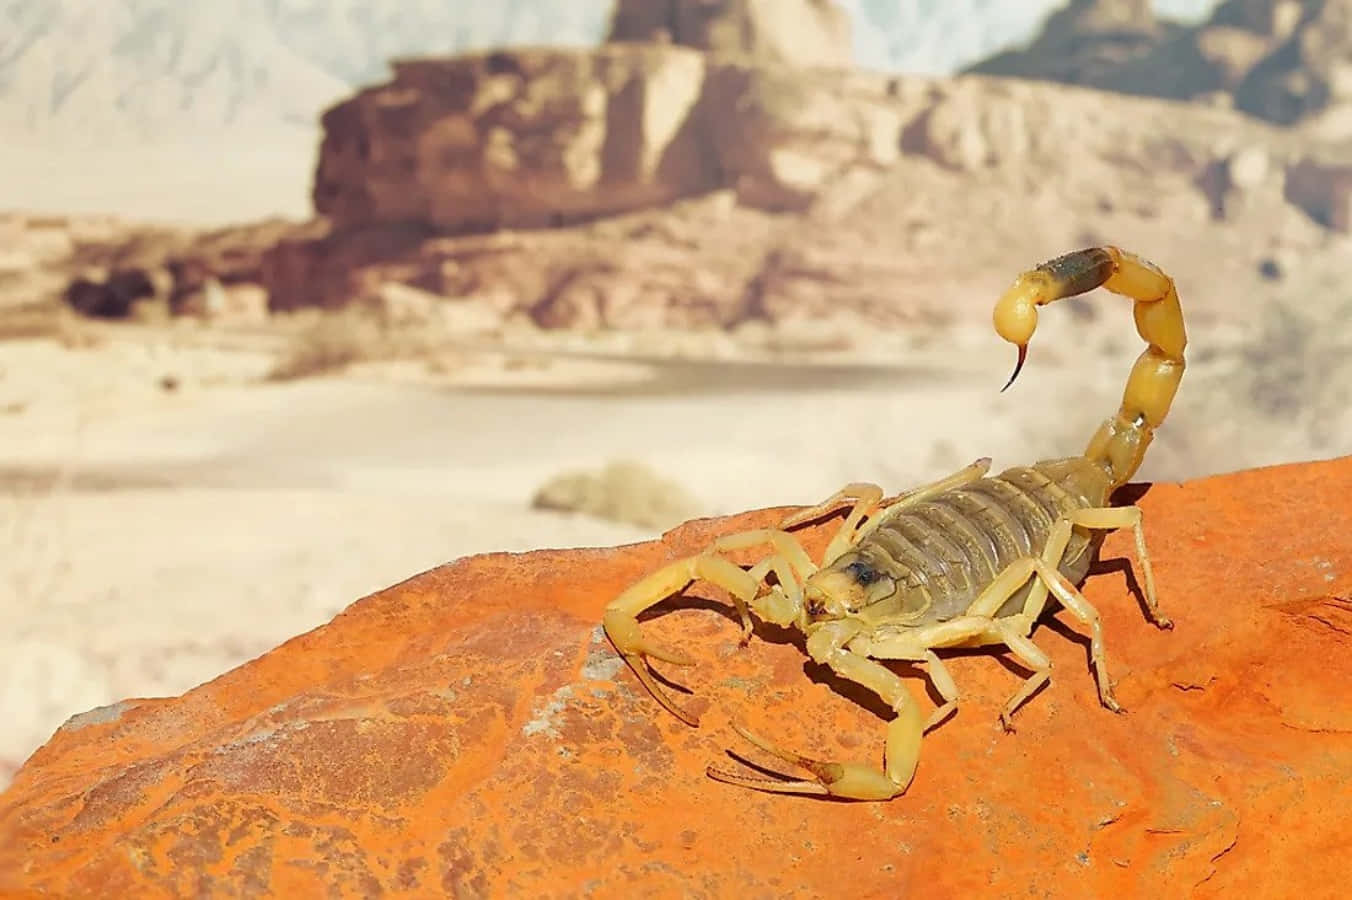 A Scorpion Is Sitting On A Rock In The Desert